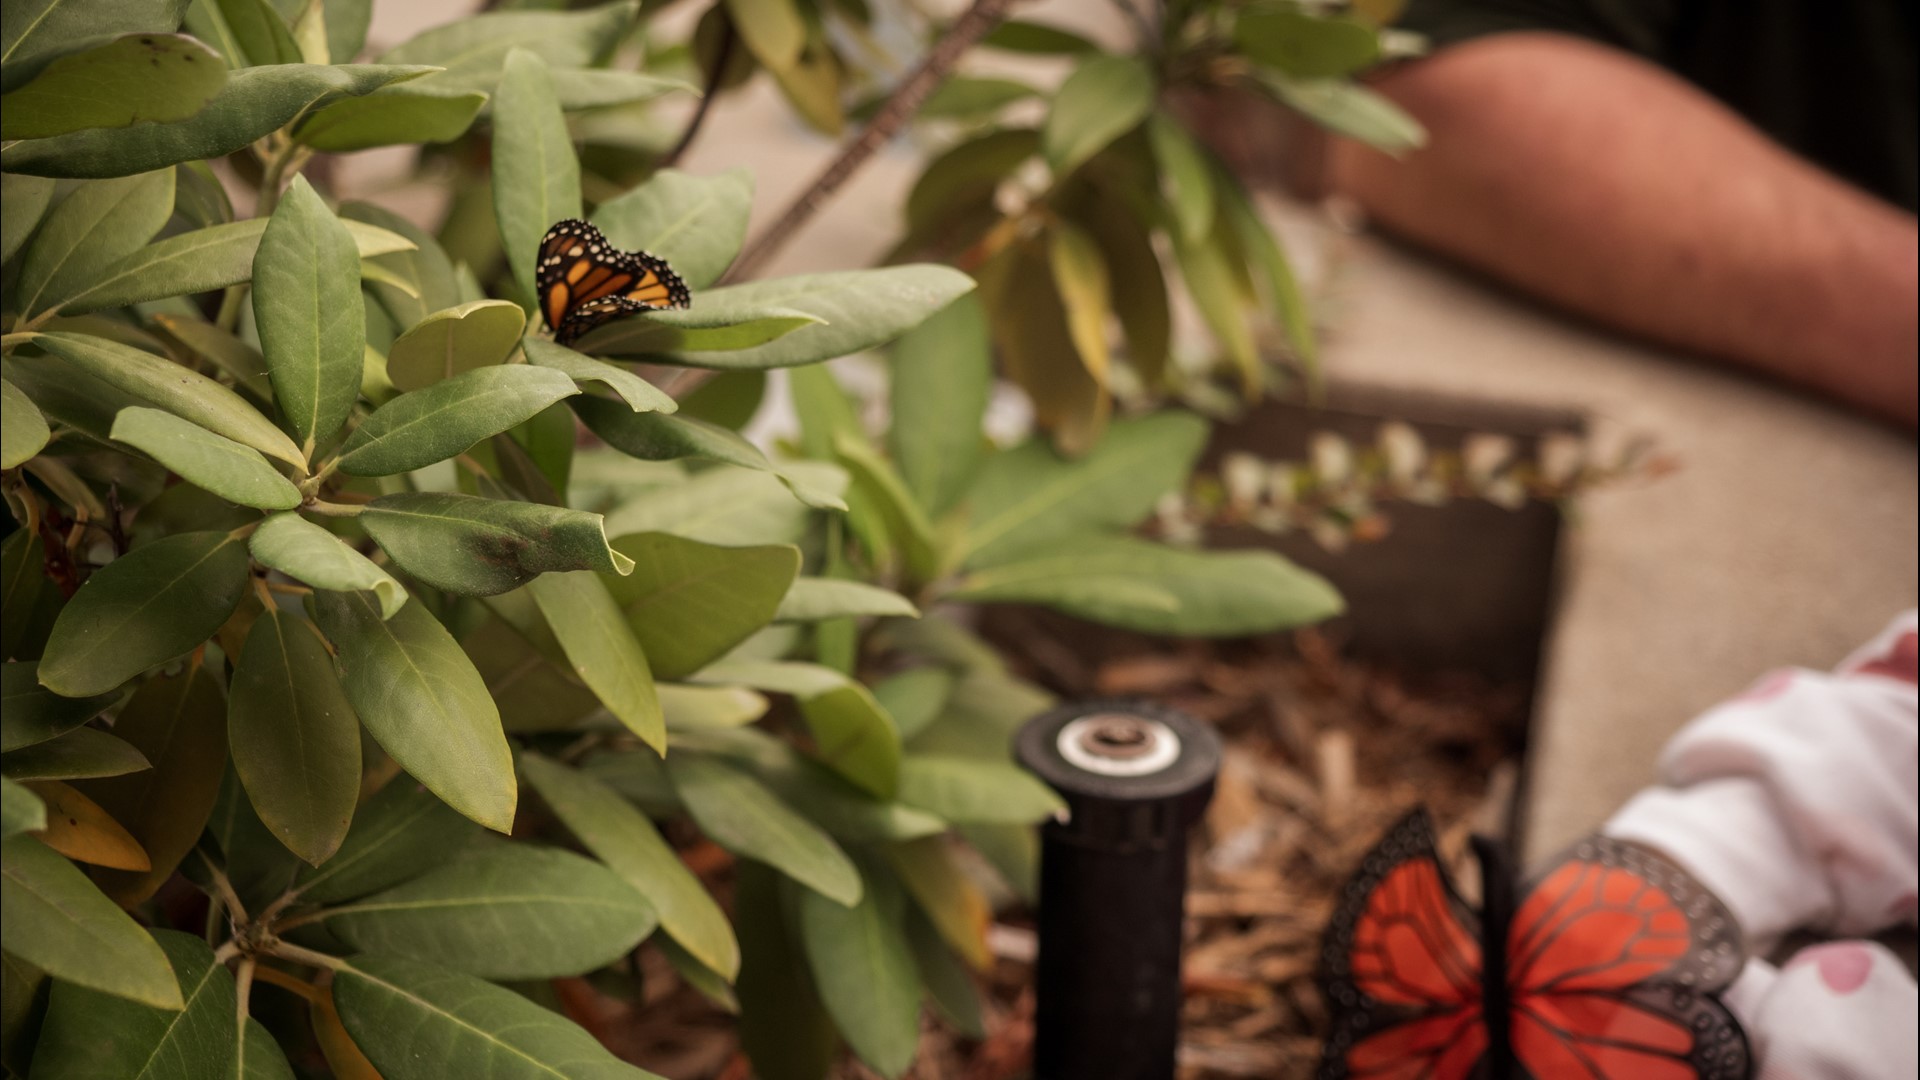 Since its inception, Copper & Kings Distillery has provided sanctuary to the species, and they hosted Brandy for the Butterflies for the community.